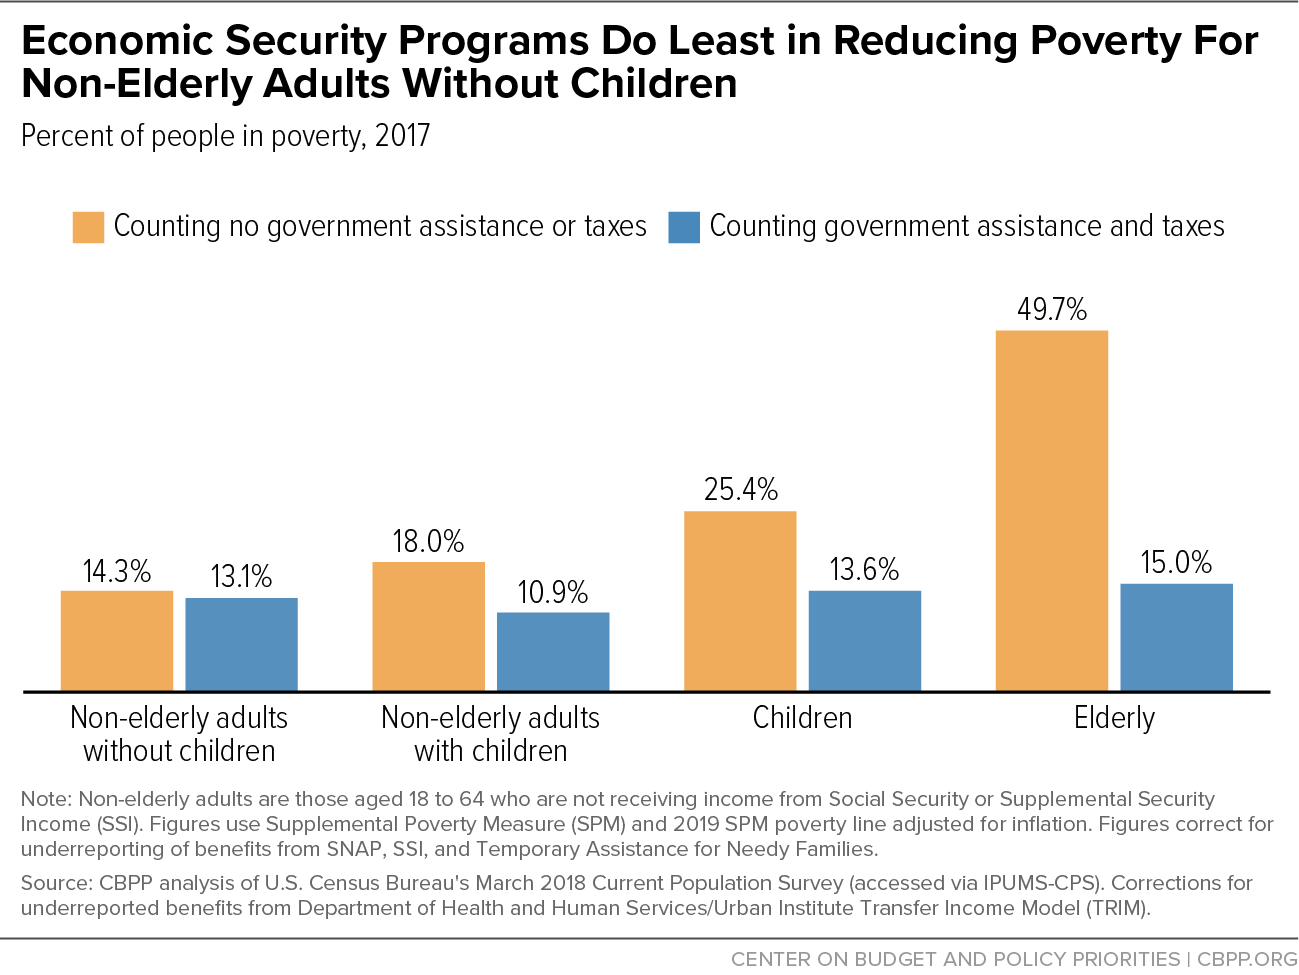 Economic Security Programs Do Least in Reducing Poverty for Non-Elderly Adults Without Children